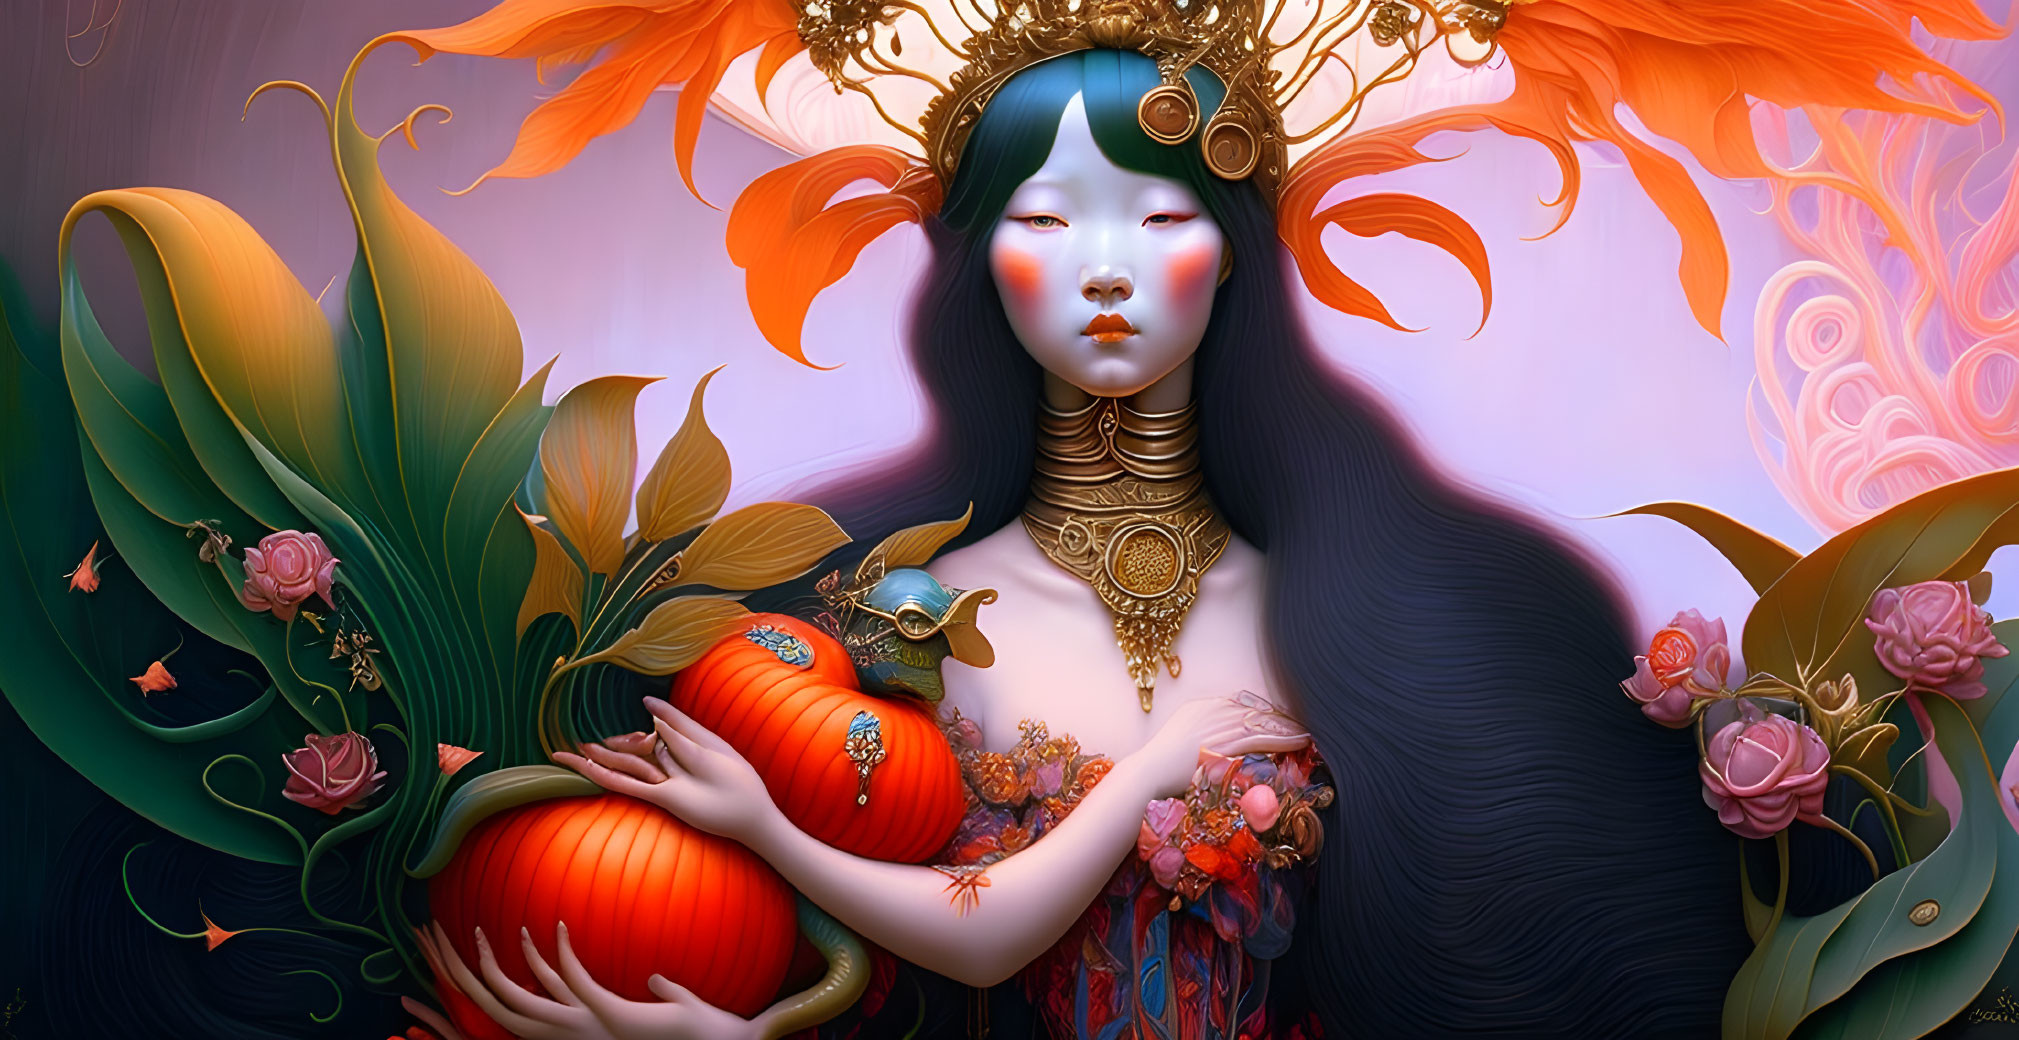 Blue-skinned woman with golden headdress holding a pumpkin in mystical setting